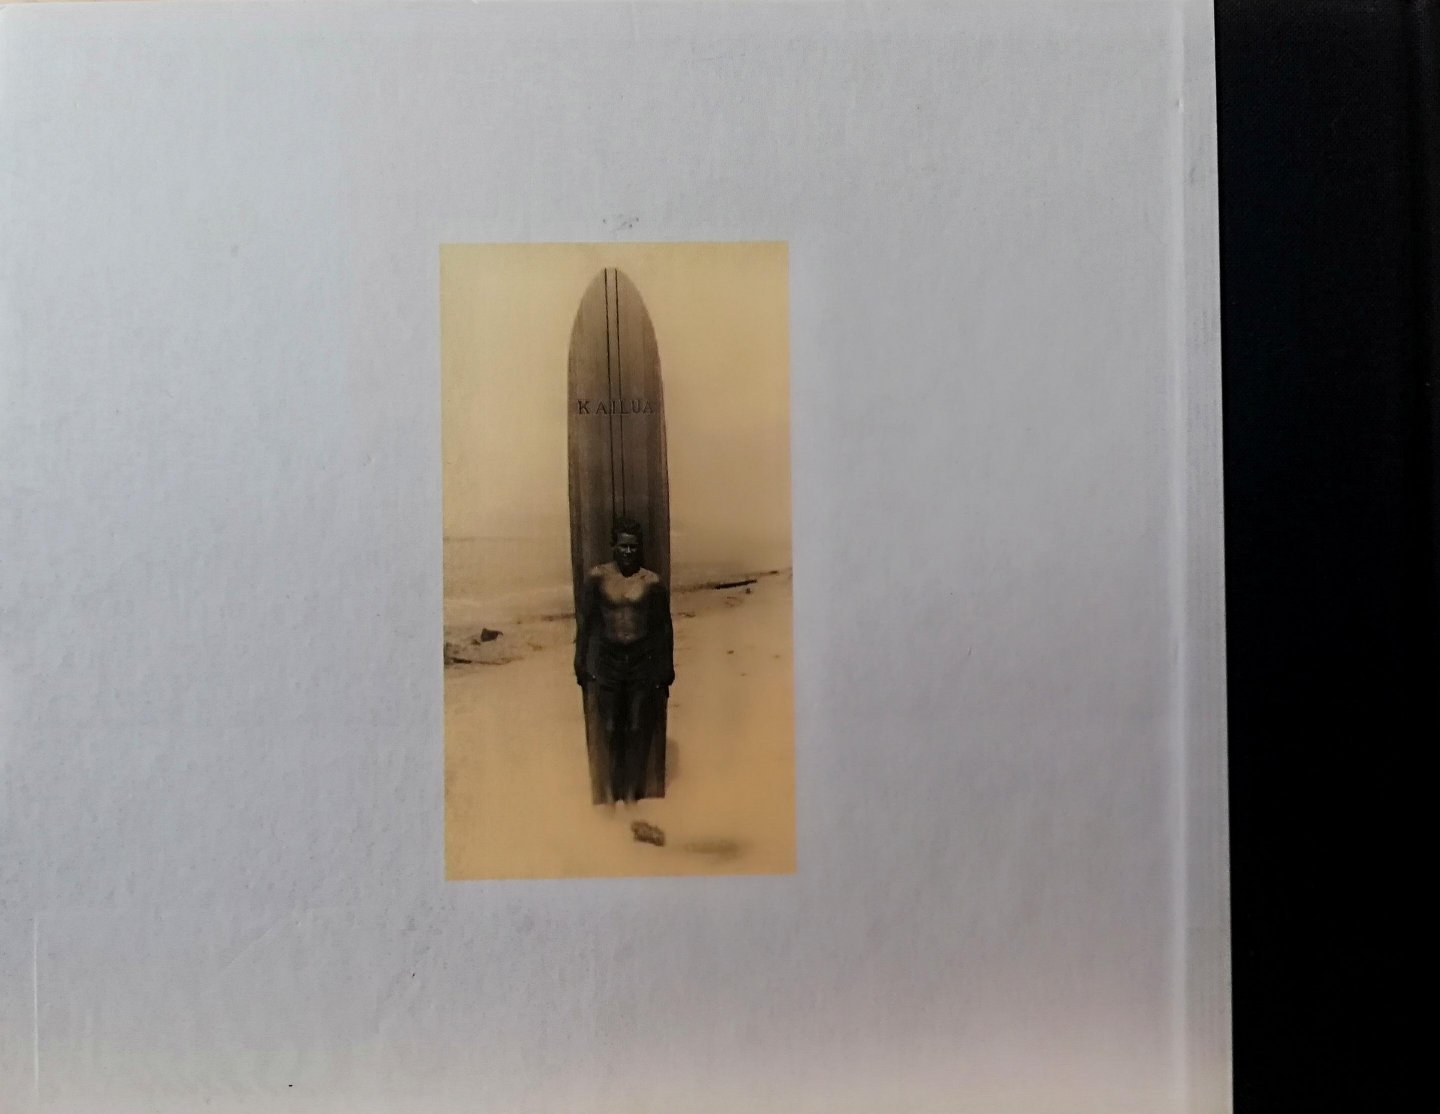 (JAMES, DON). JAMES, DON. FOREWORD BY C.R. STECYK . [ ISBN  9780811821001  ] 1107 ( Zeer zeldzaam ,) - Surfing  San  Onofre  to  Point  dume   1936  -  1942 . ( Photographs by Don James .